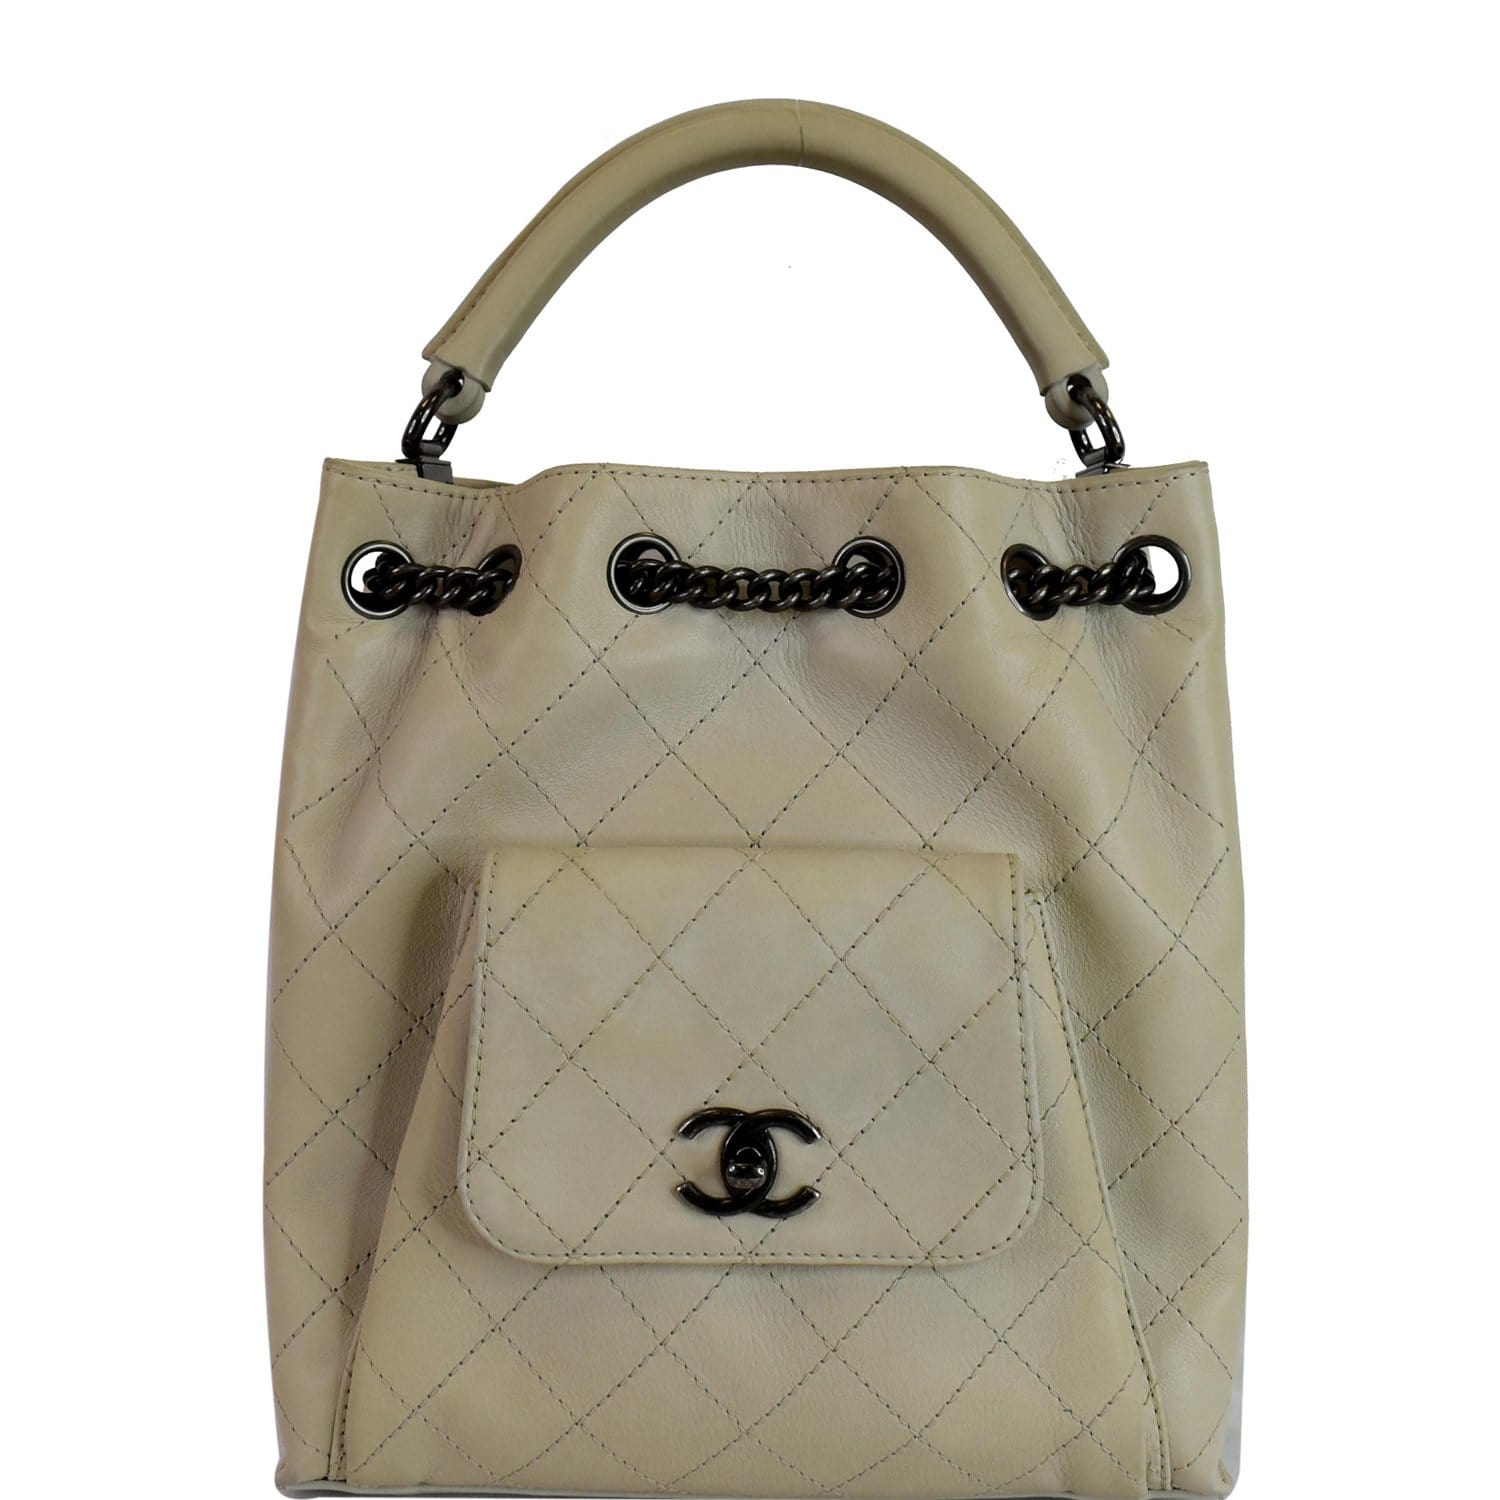 Authenticate This CHANEL • Read the rules & use format outlined in 1st/2nd  posts, Page 568